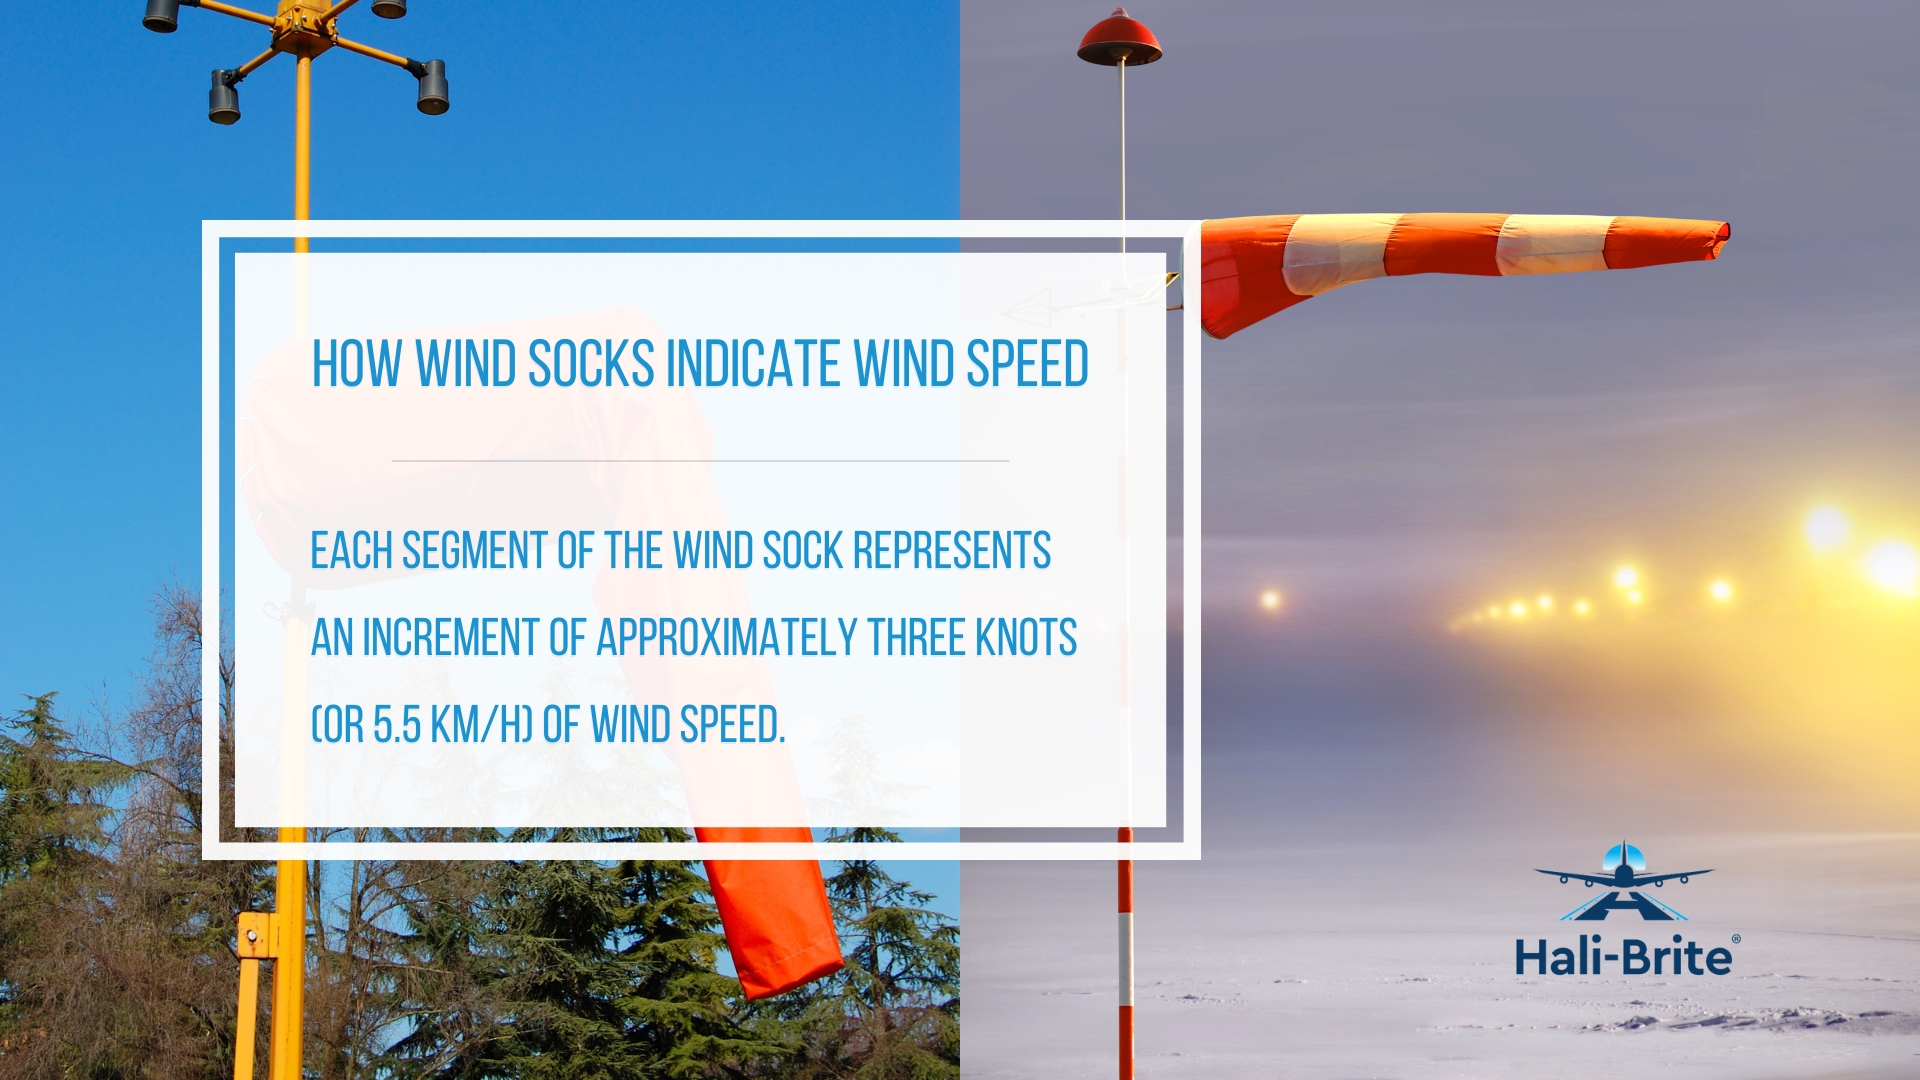 Infographic image of how wind socks indicate wind speed